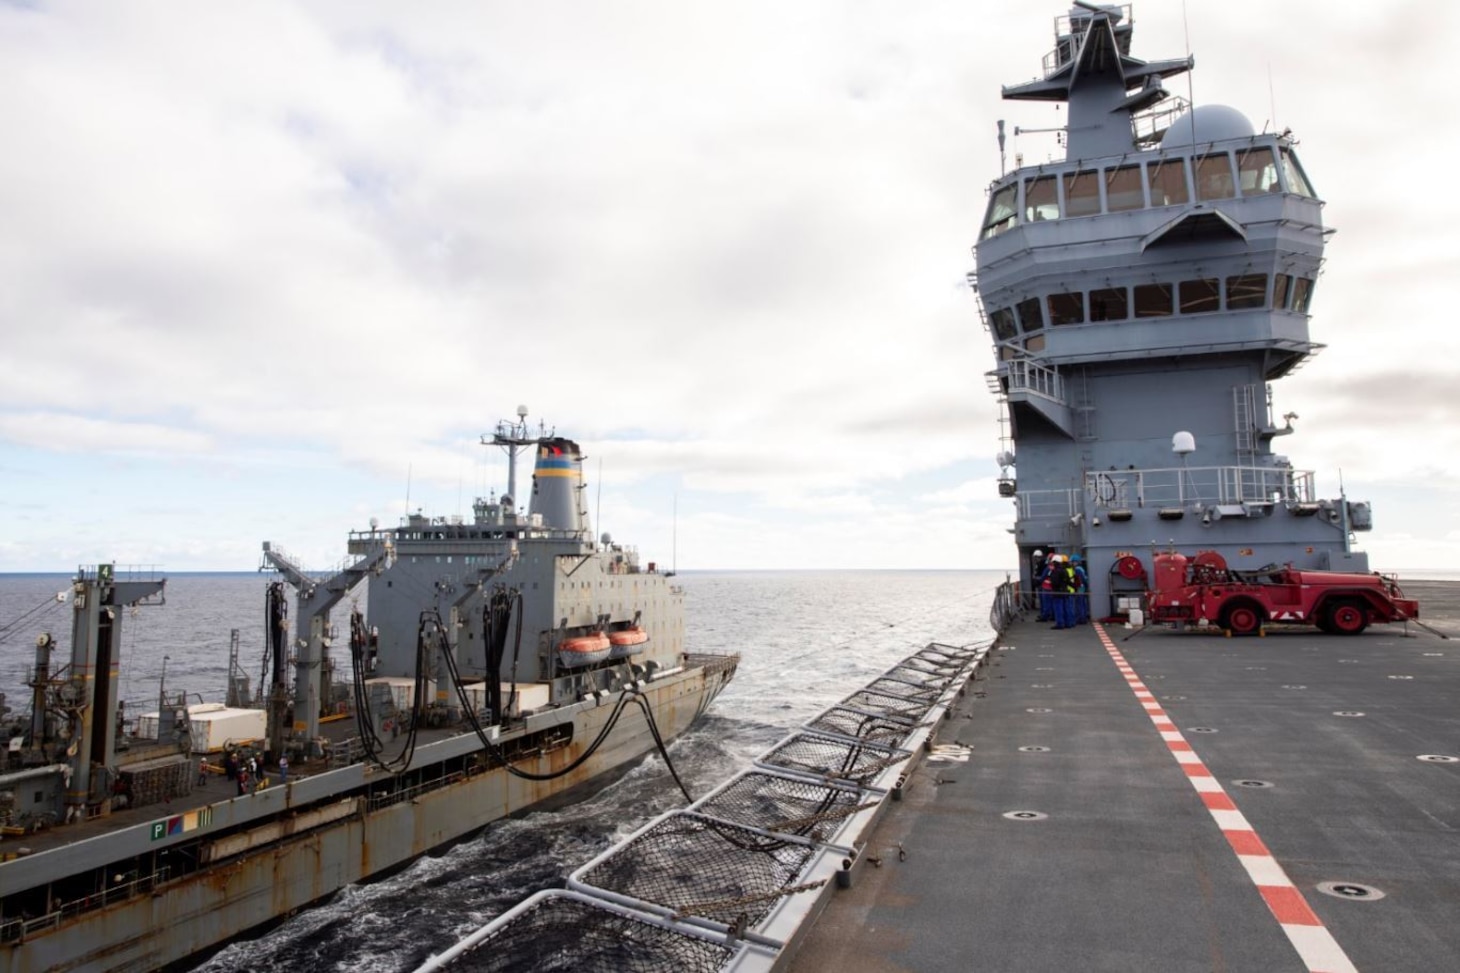 USNS Laramie (T-AO 203) completes a refueling-at-sea with Mistral-class LHD Dixmude (L9015) in the Atlantic Ocean, Dec. 10.